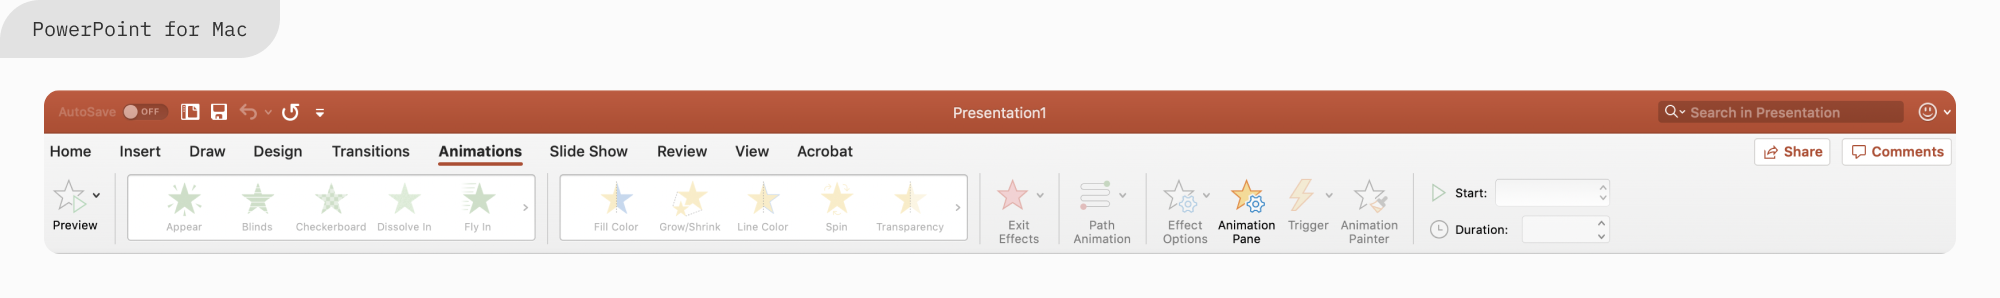 example of powerpoint mac ribbon